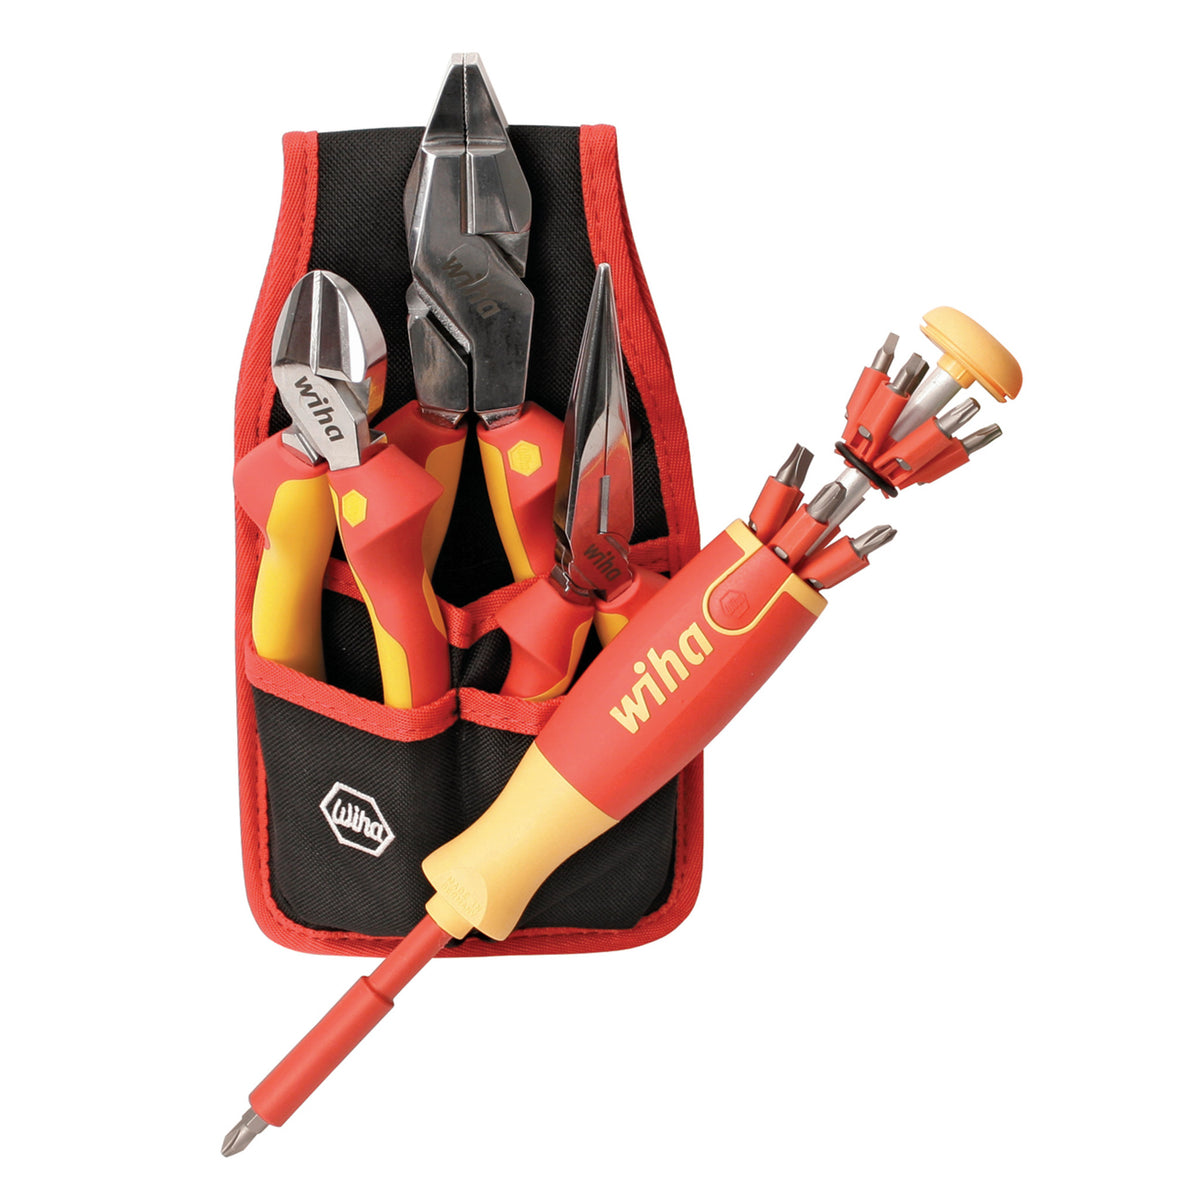 Wiha 32886 17 Piece Insulated Pliers-Cutters and Pop-Up Set